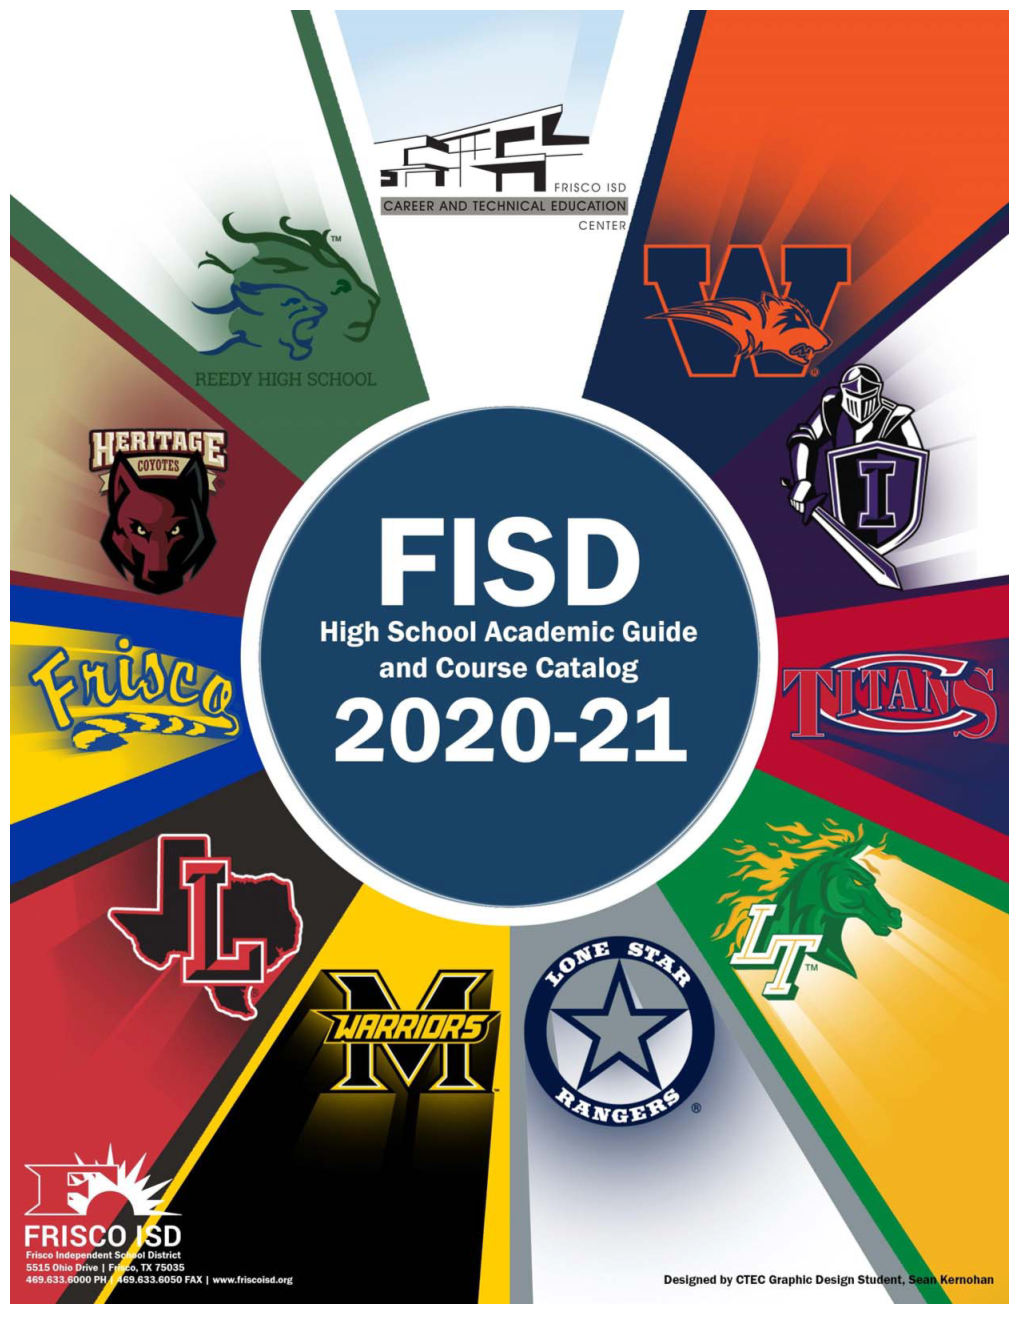 FISD High School Academic Guide and Course Catalog 2020-2021